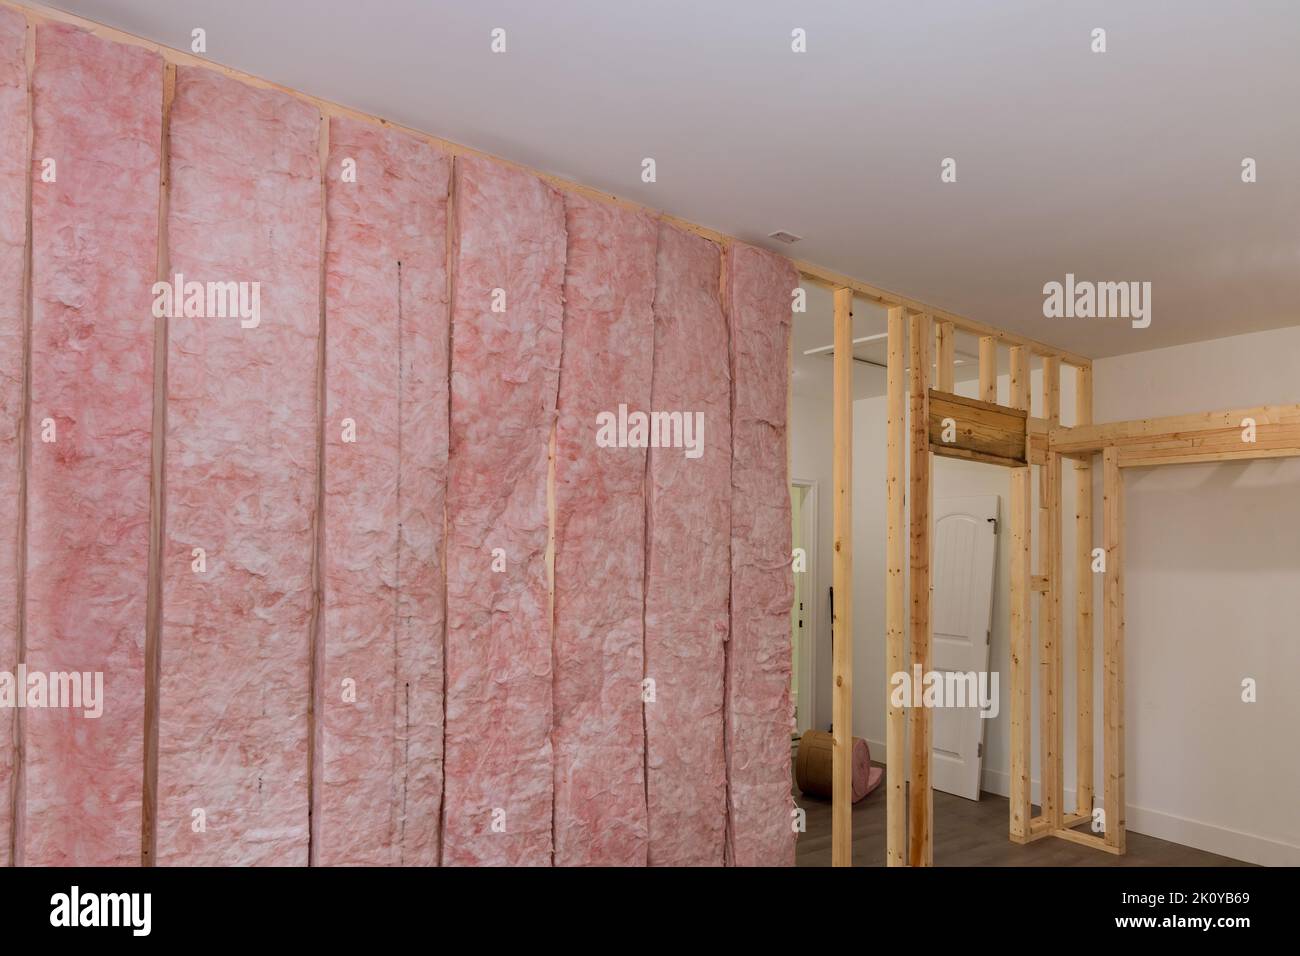 The installation of mineral fiber glass wool as an interior thermal and sound insulation is performed between beams that frame the wall Stock Photo